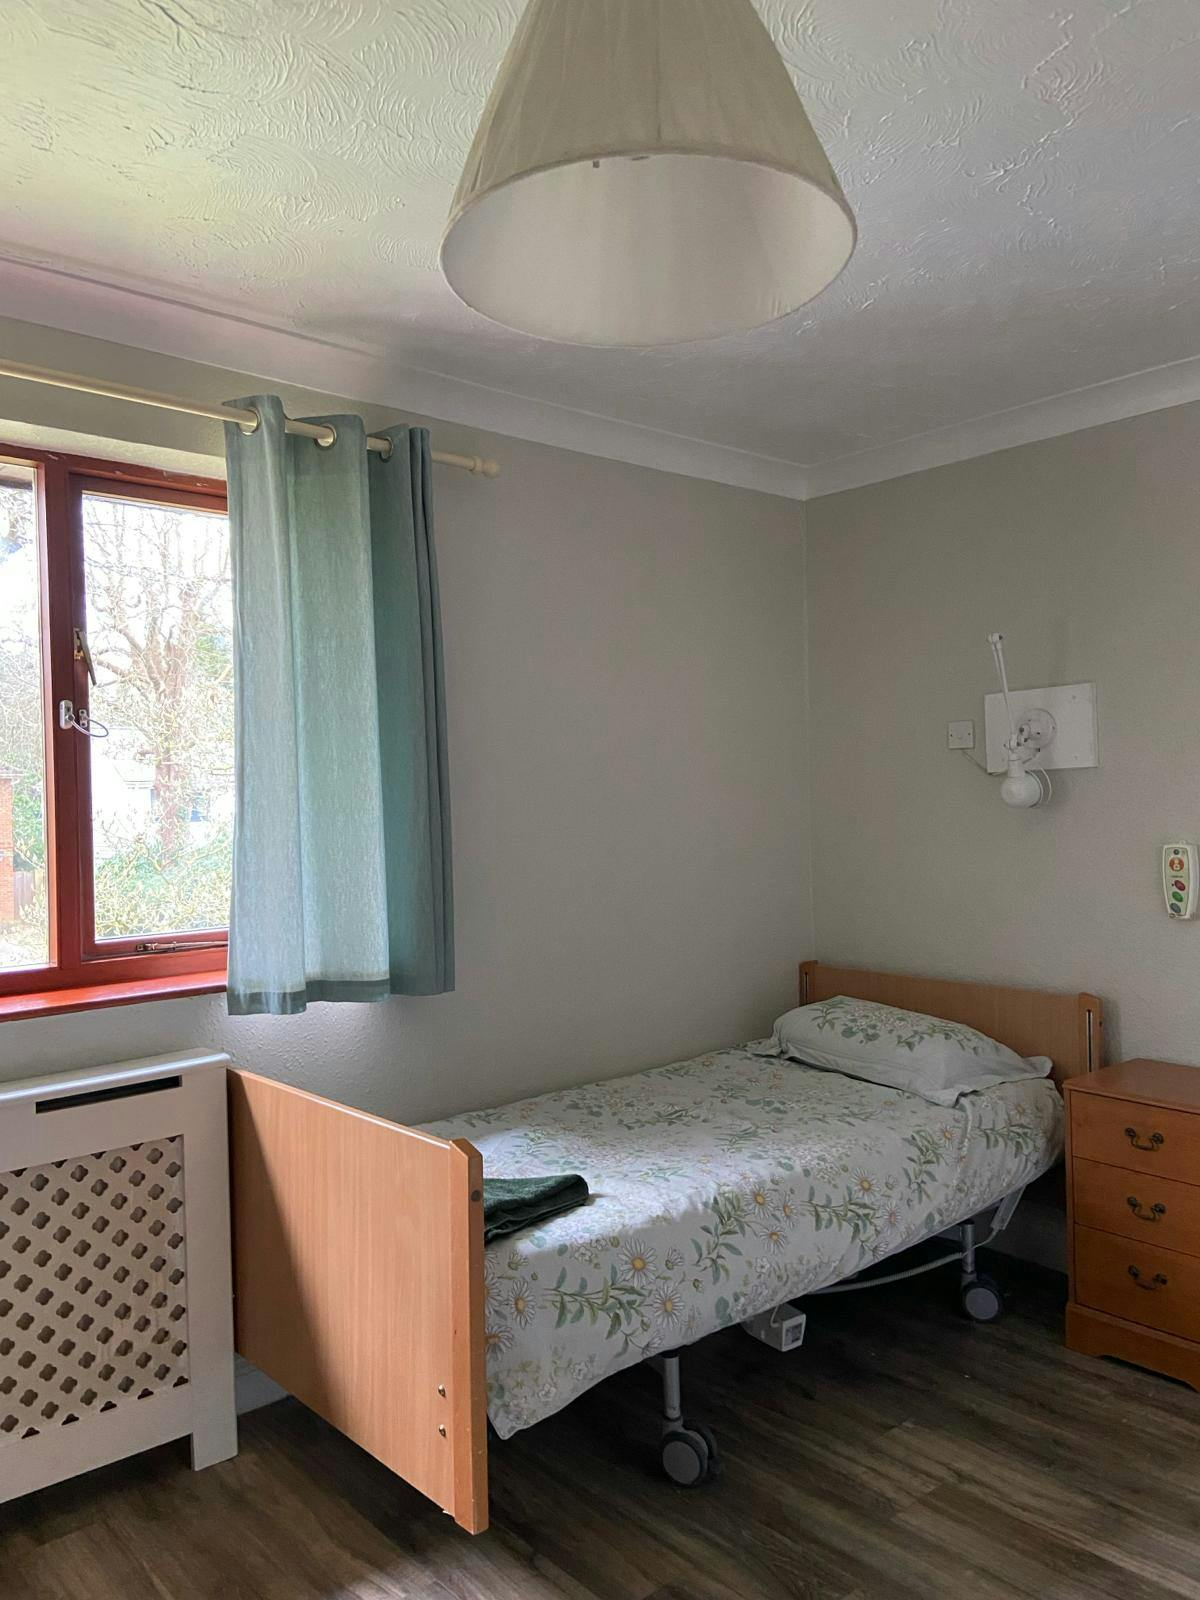 Bedroom at  Nightingales Care Home in Maidenhead